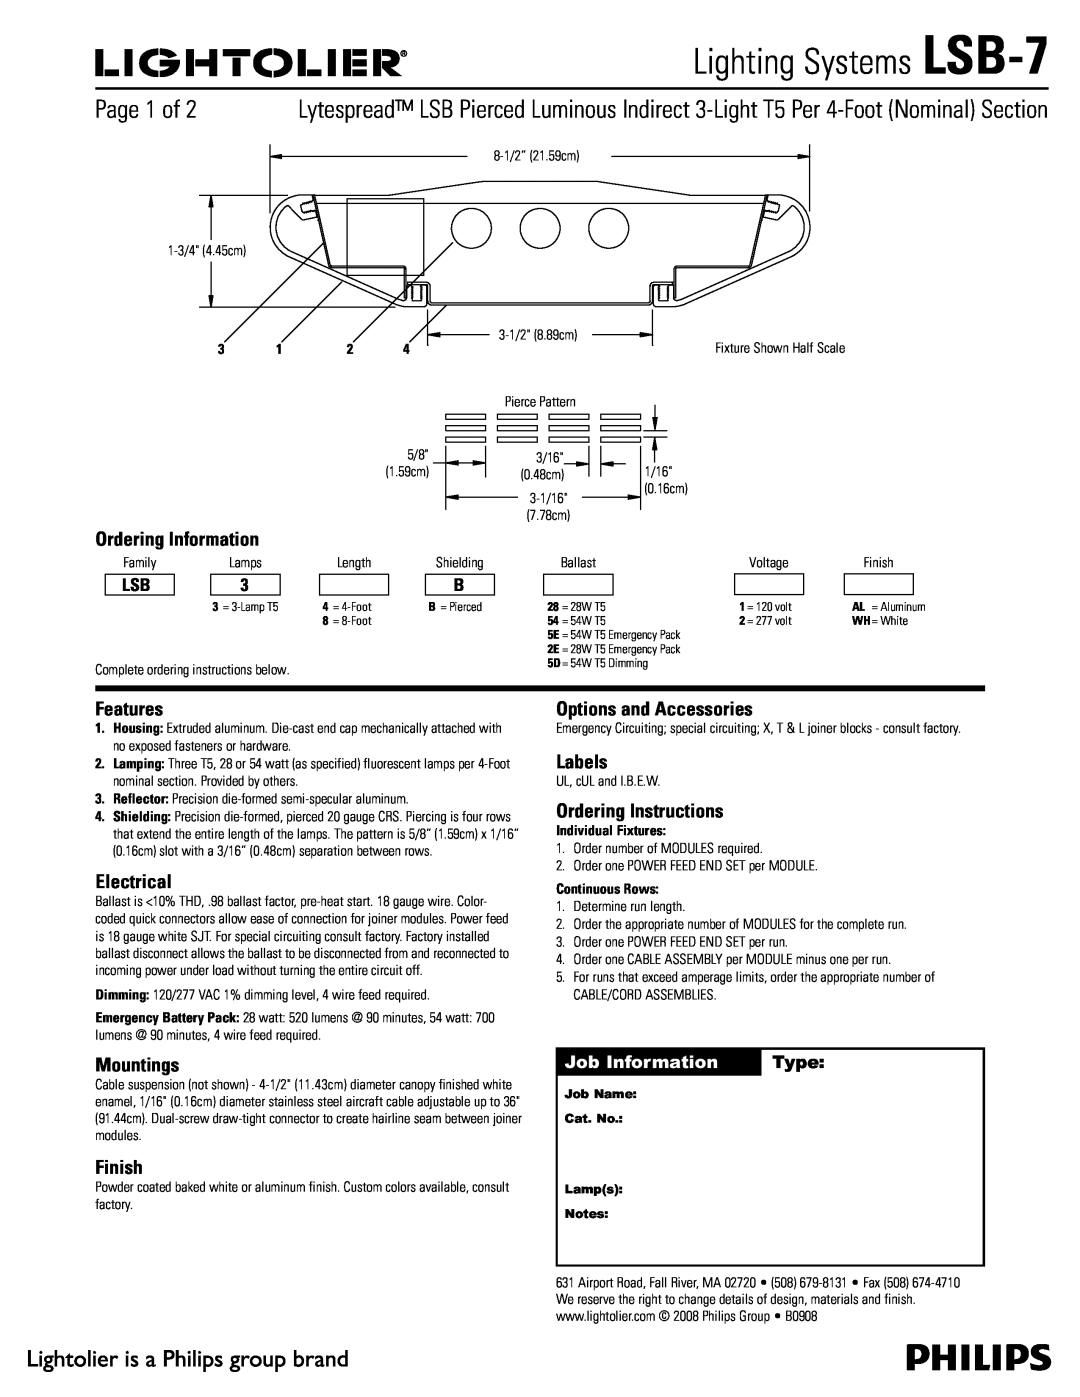 Lightolier LSB-7 manual Ordering Information, Features, Electrical, Mountings, Finish, Options and Accessories, Labels 